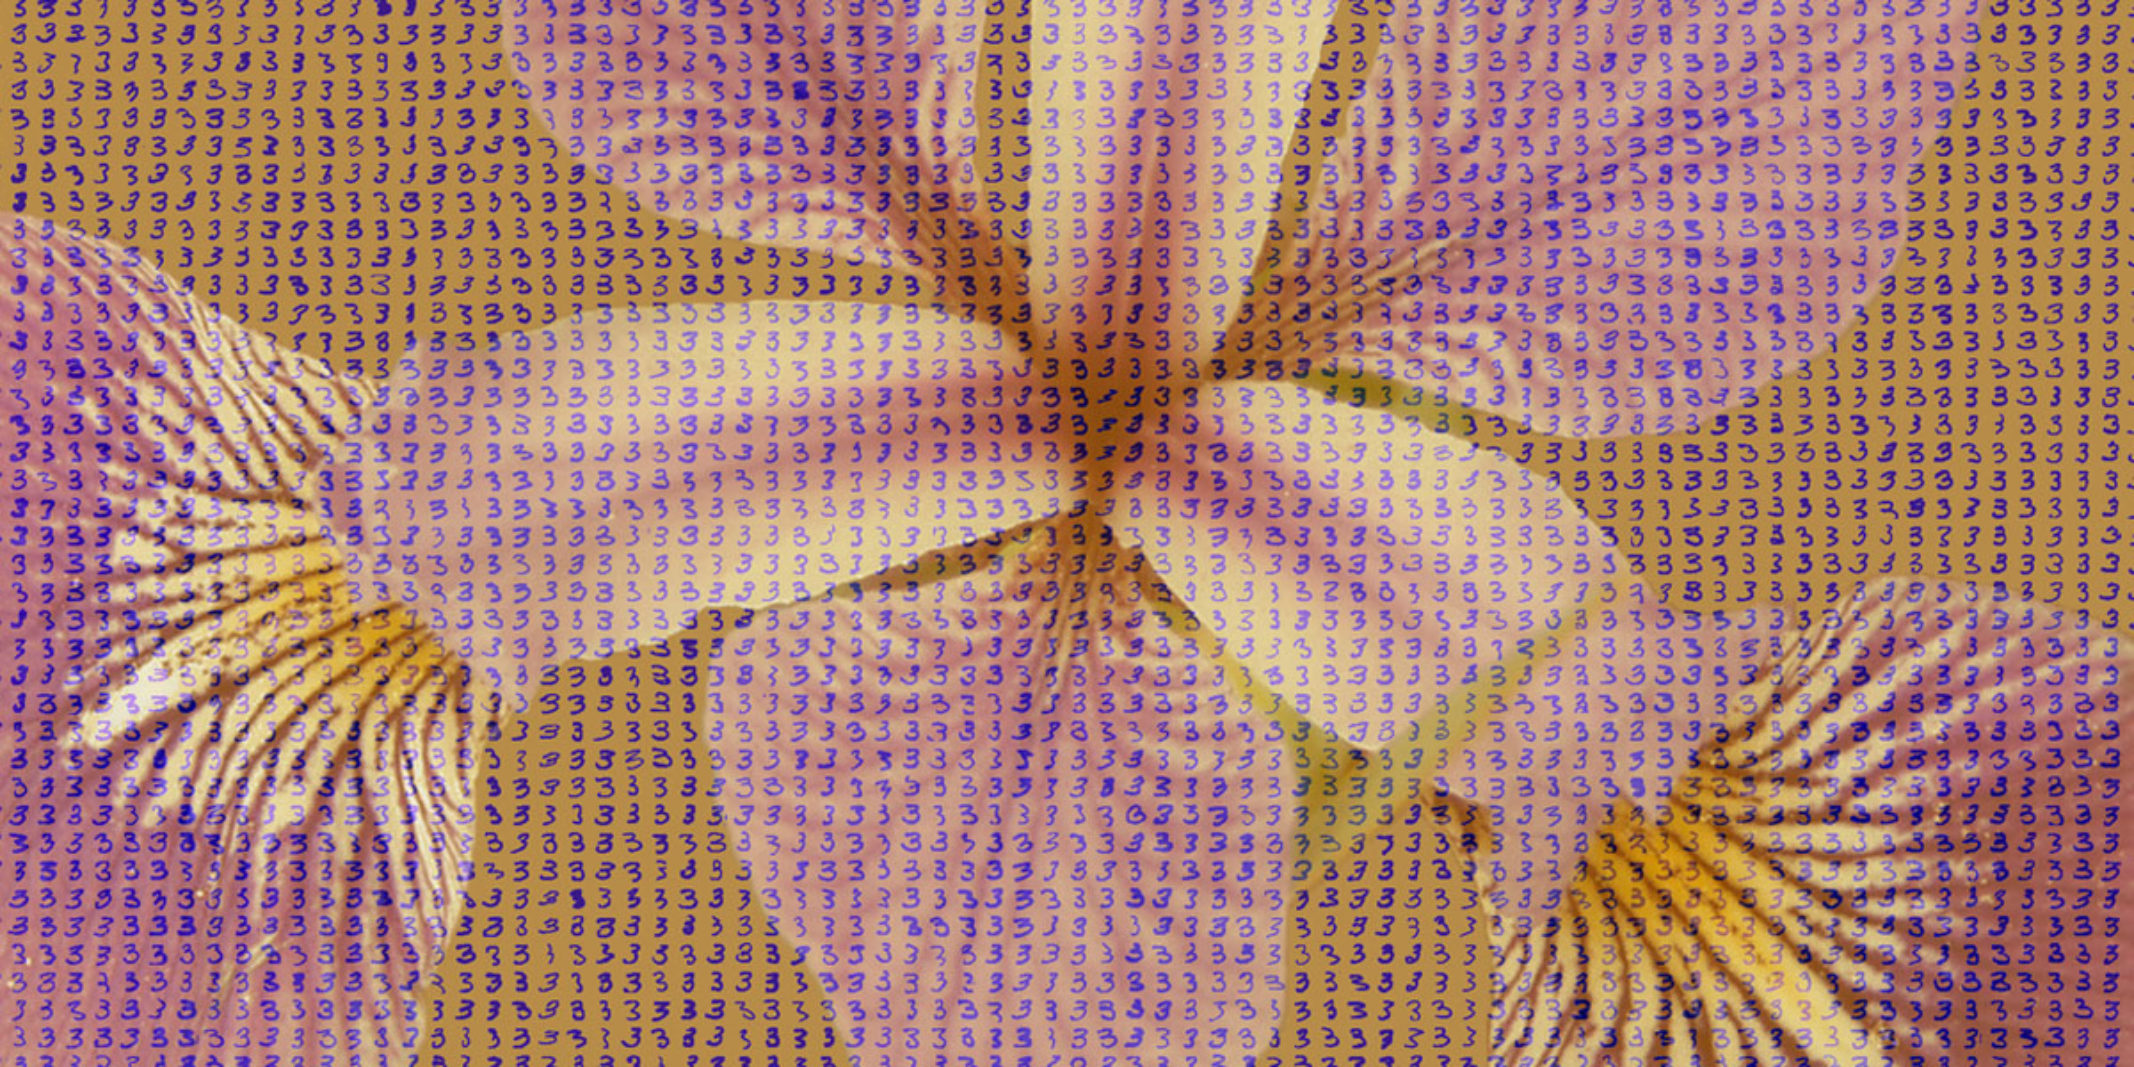 A Image of a flower with a bunch of 3s written all over the image